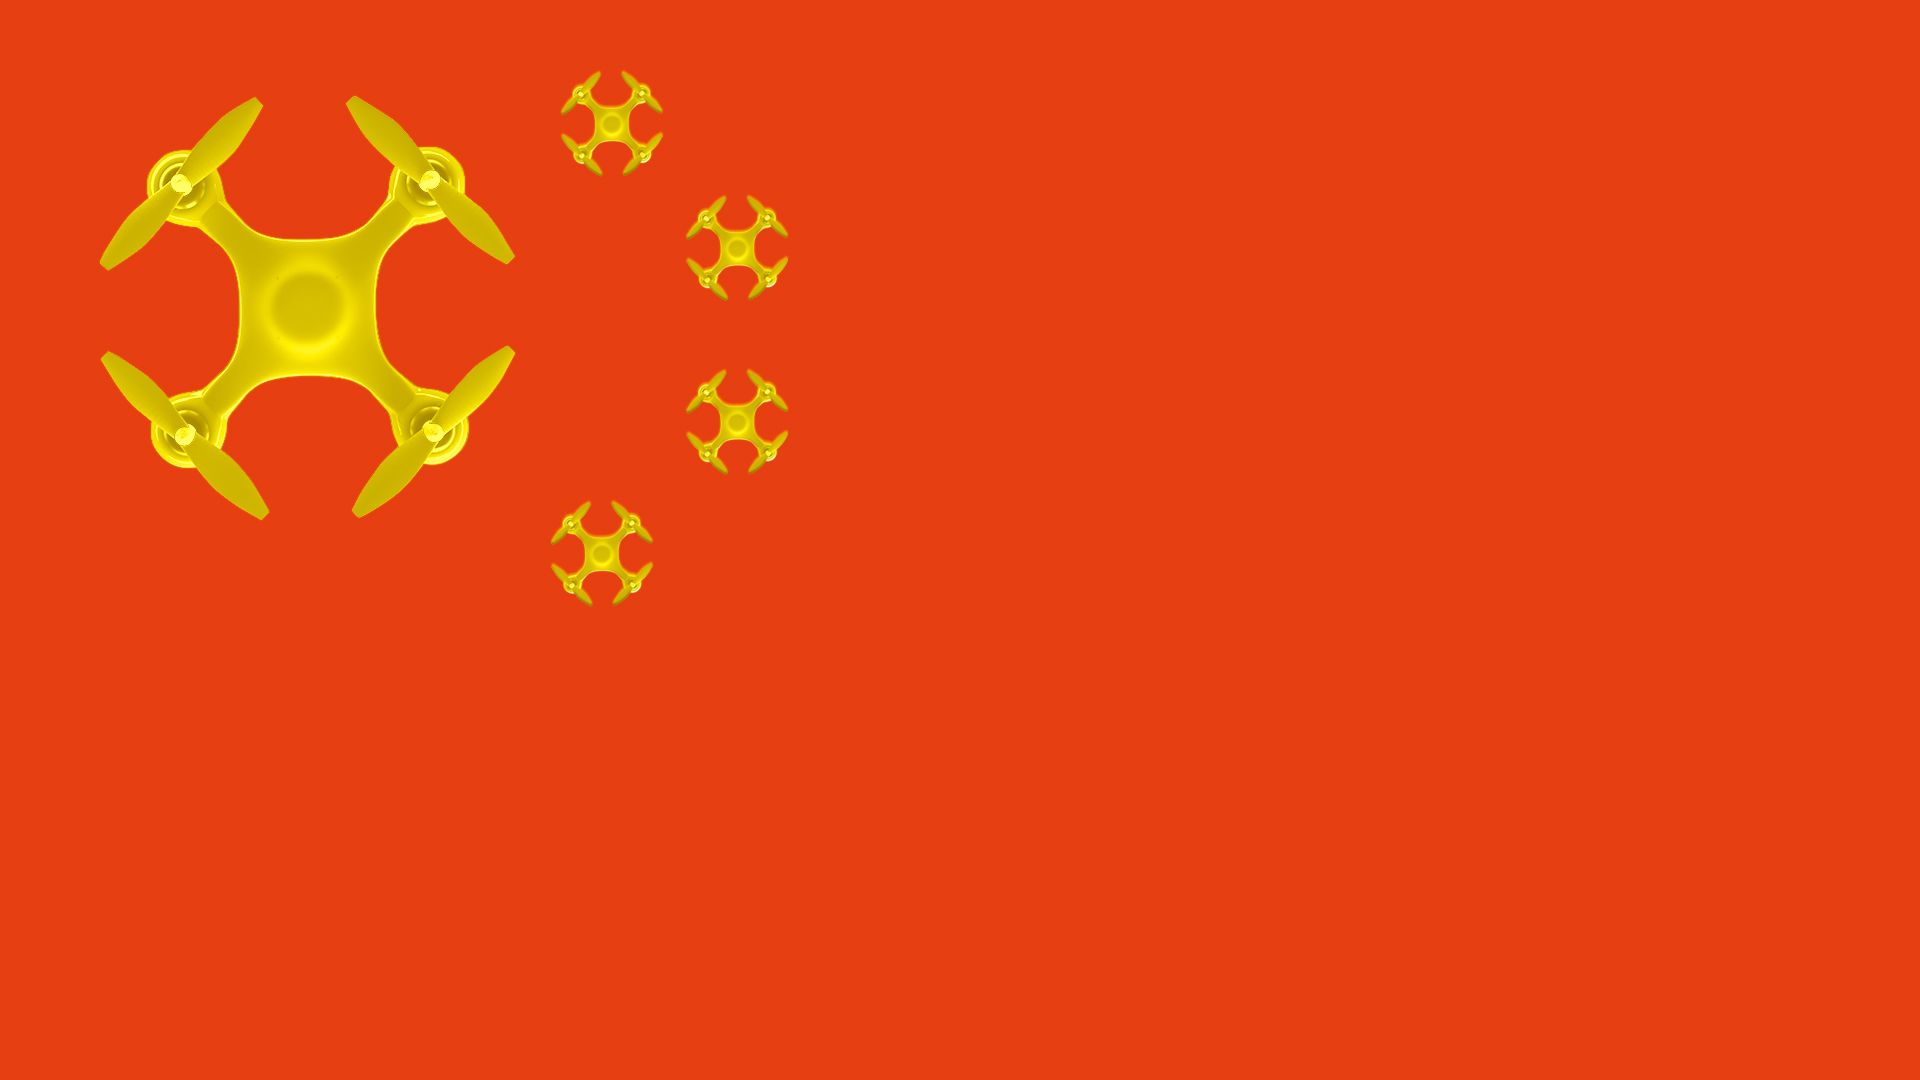 Illustration of the Chinese flag with drones in place of stars